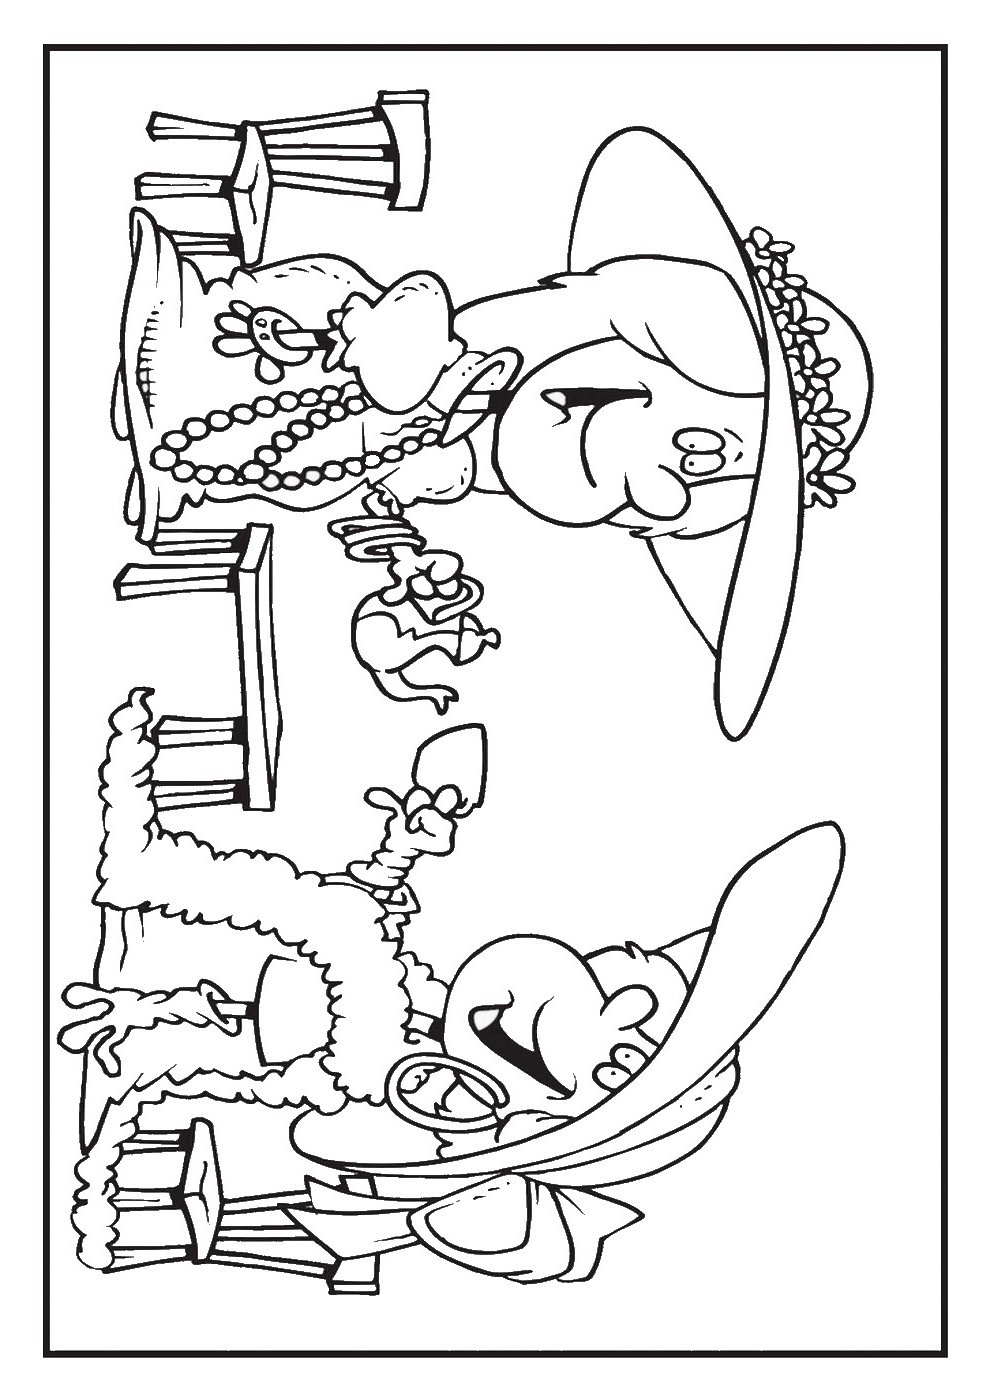 Tea Party Coloring Pages
 Tea Party Coloring Pages